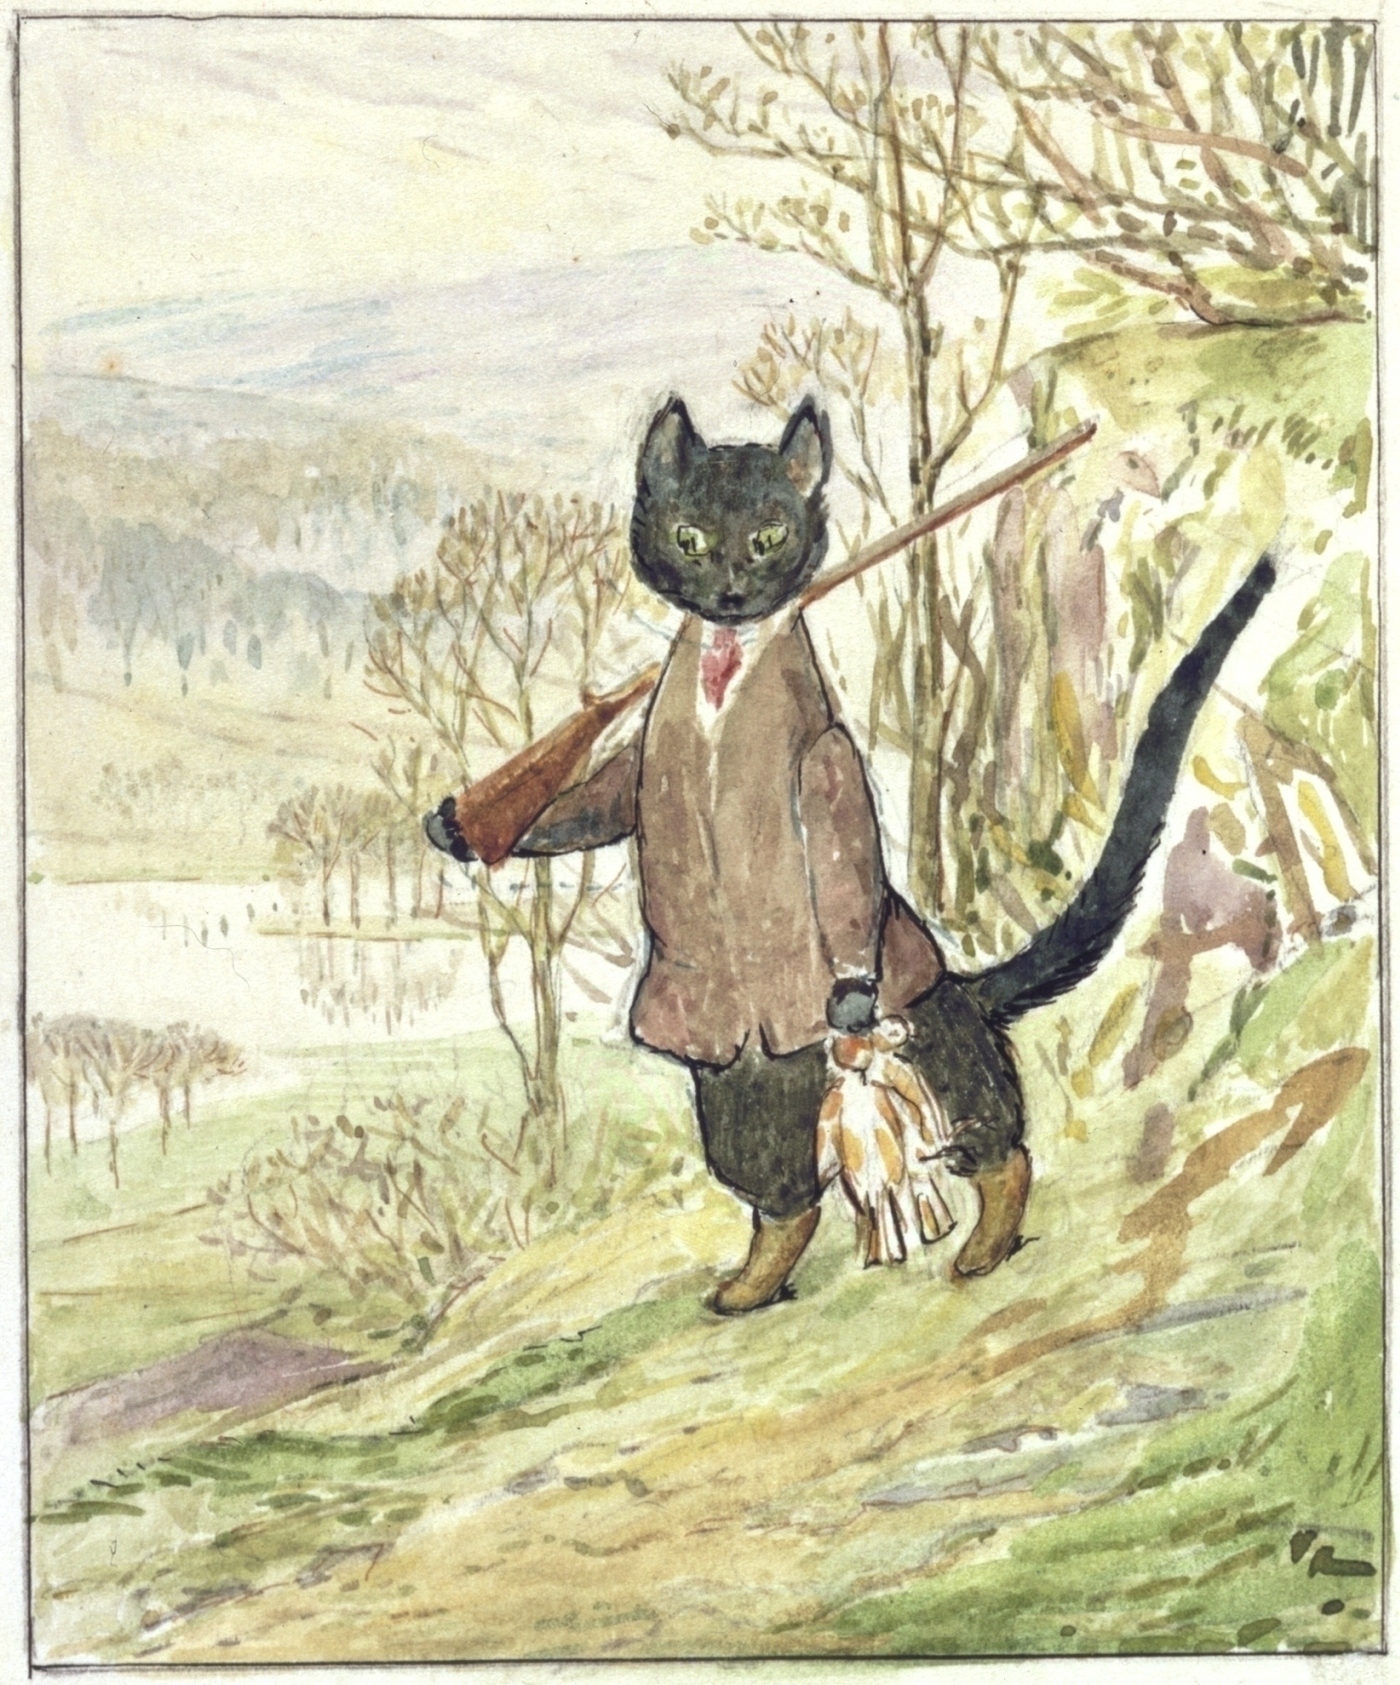 Beatrix Potter wrote three drafts of The Tale of Kitty-in-Boots and did one watercolor illustration (above). But the book was left incomplete when she died in 1943, and it is now being published posthumously, with illustrations by Quentin Blake.